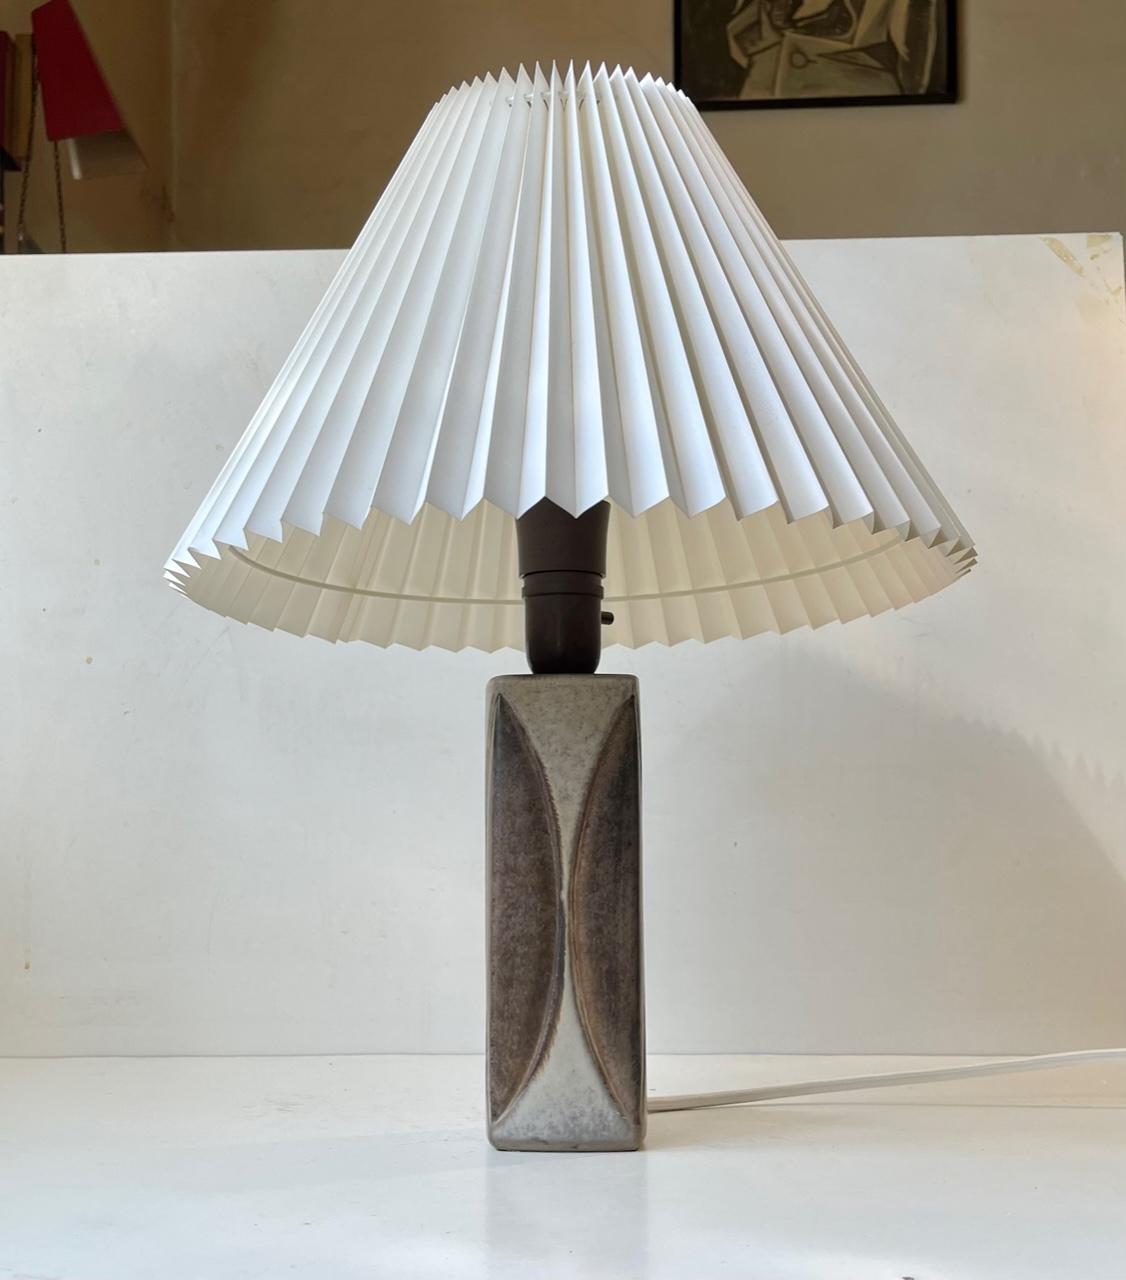 Late 20th Century Ceramic Table Lamp with Glazed Leaves by Marianne Starck for Michael Andersen For Sale